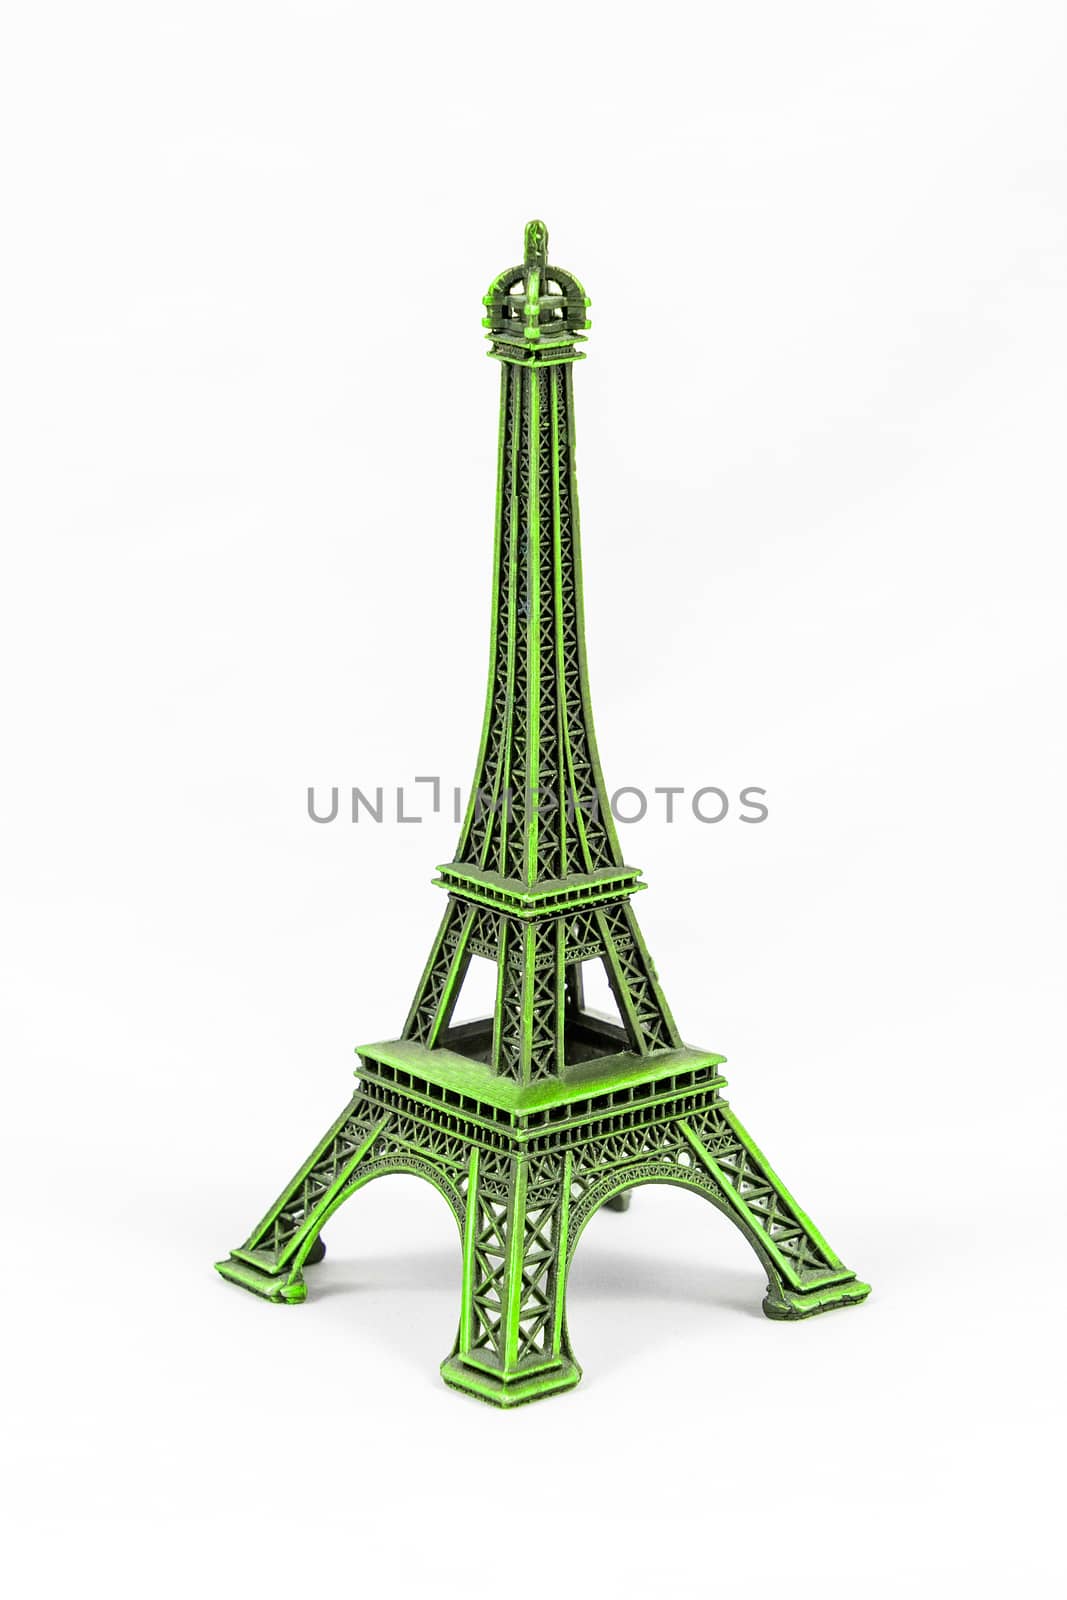 Close up shot of a green miniature model of the Eiffel Tower isolated on a white background